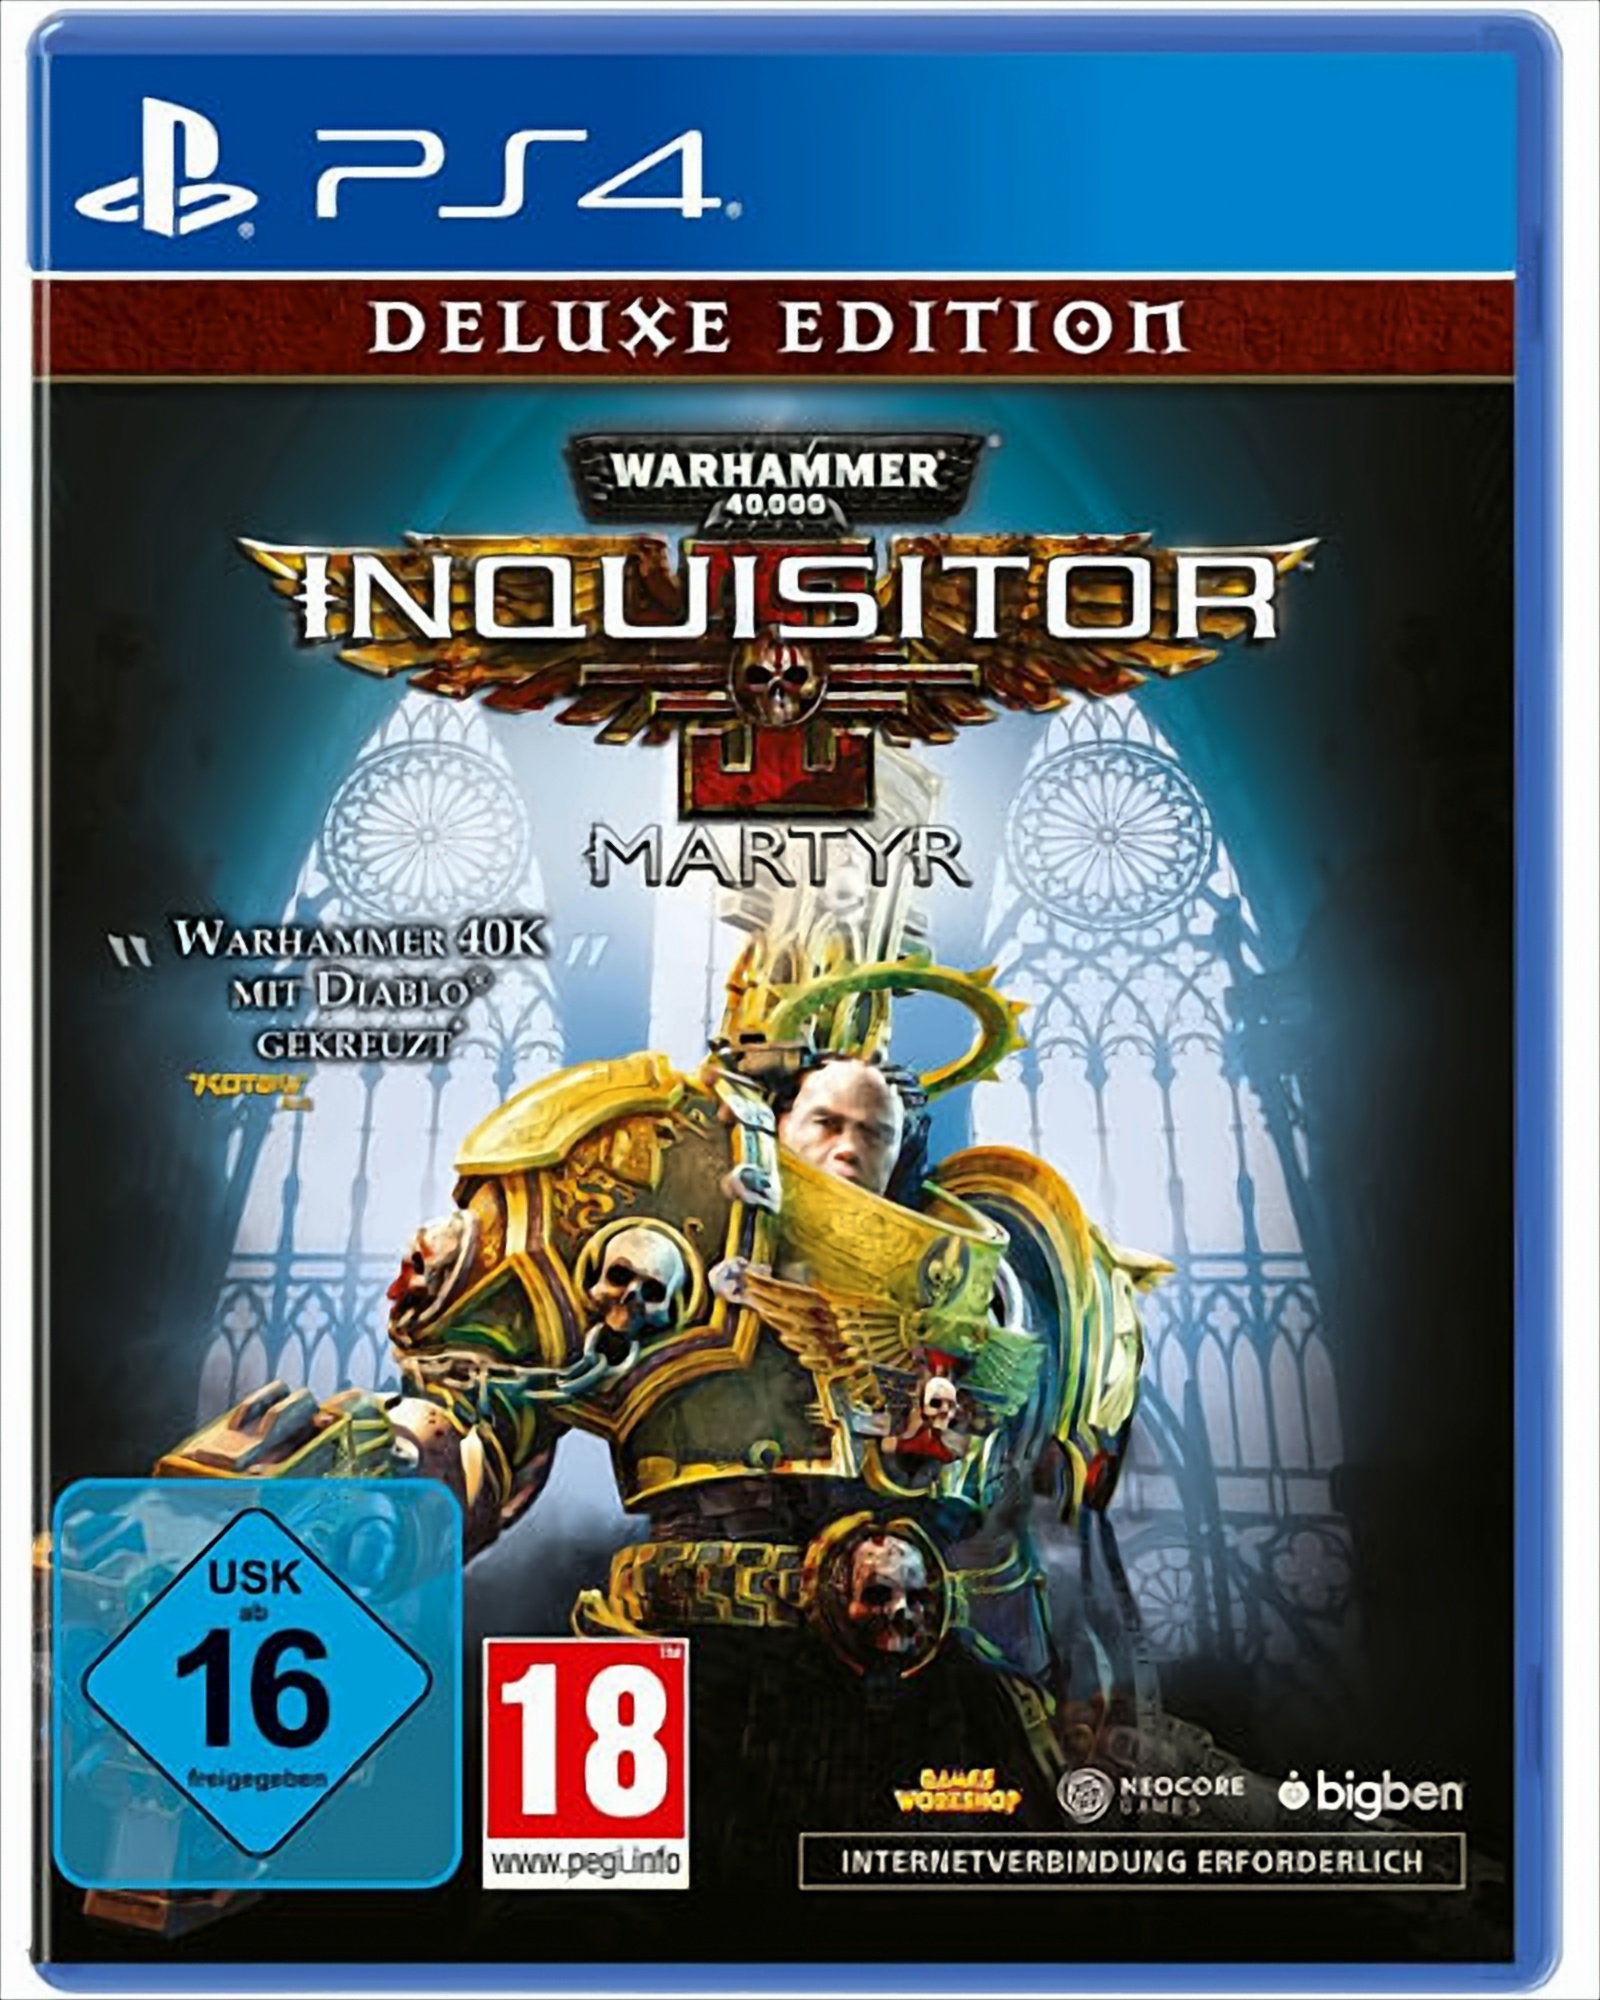 Warhammer 40.000 - Inquisitor Martyr Edition PS4 [PlayStation - DeLuxe 4